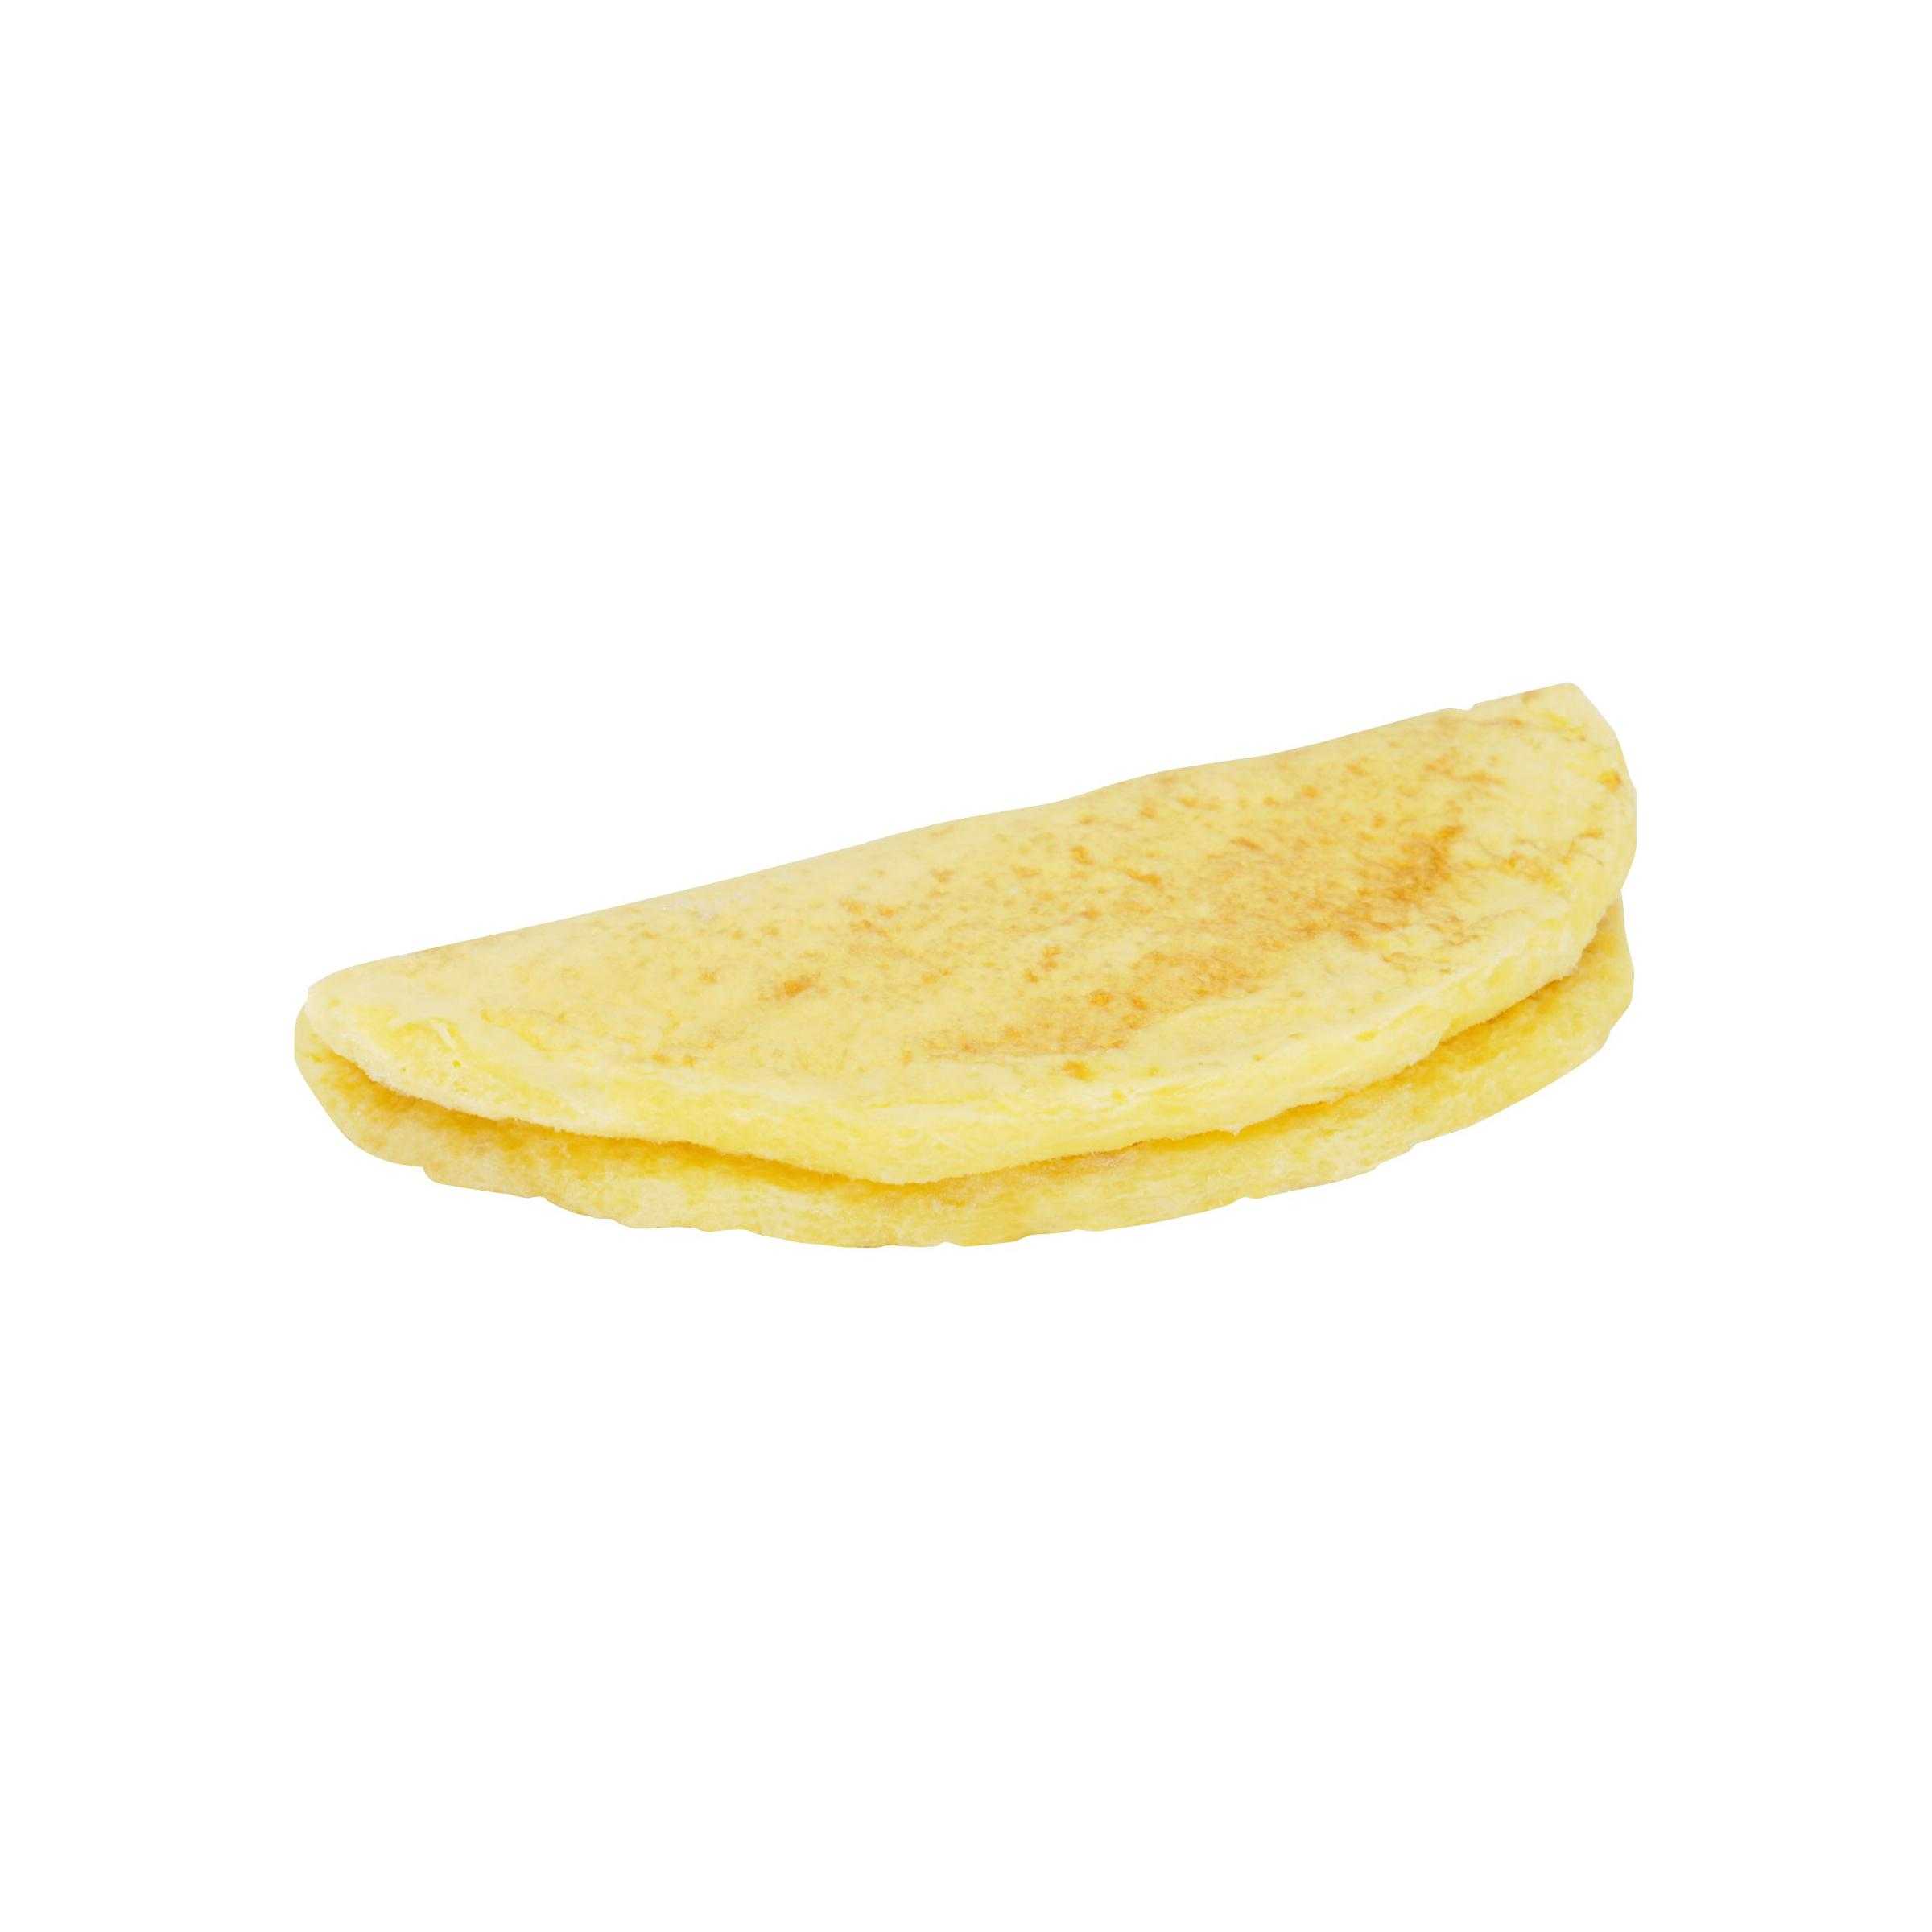 Papetti’s® Fully-Cooked 5″ x 2.5″ Singlefold Omelet filled with Colby Cheese, CN, 144/2.10 oz